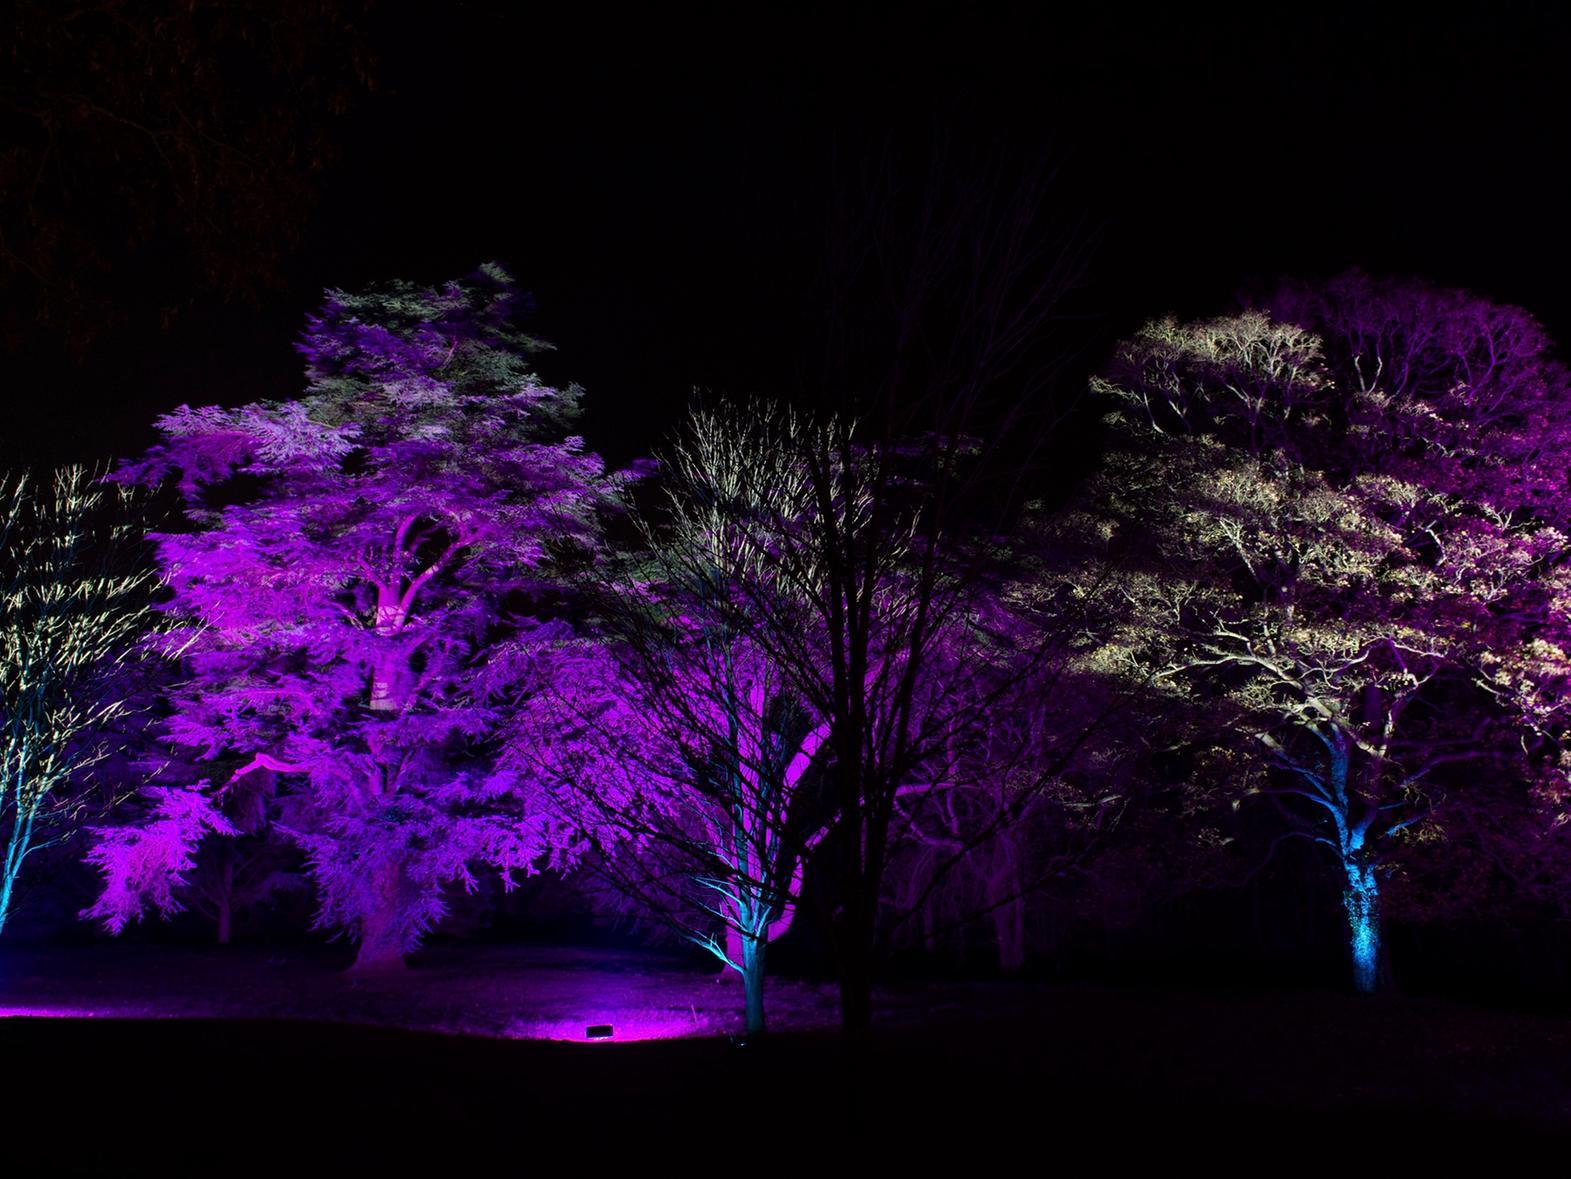 A trip to Waddesdon is sure to get you in the mood for Christmas